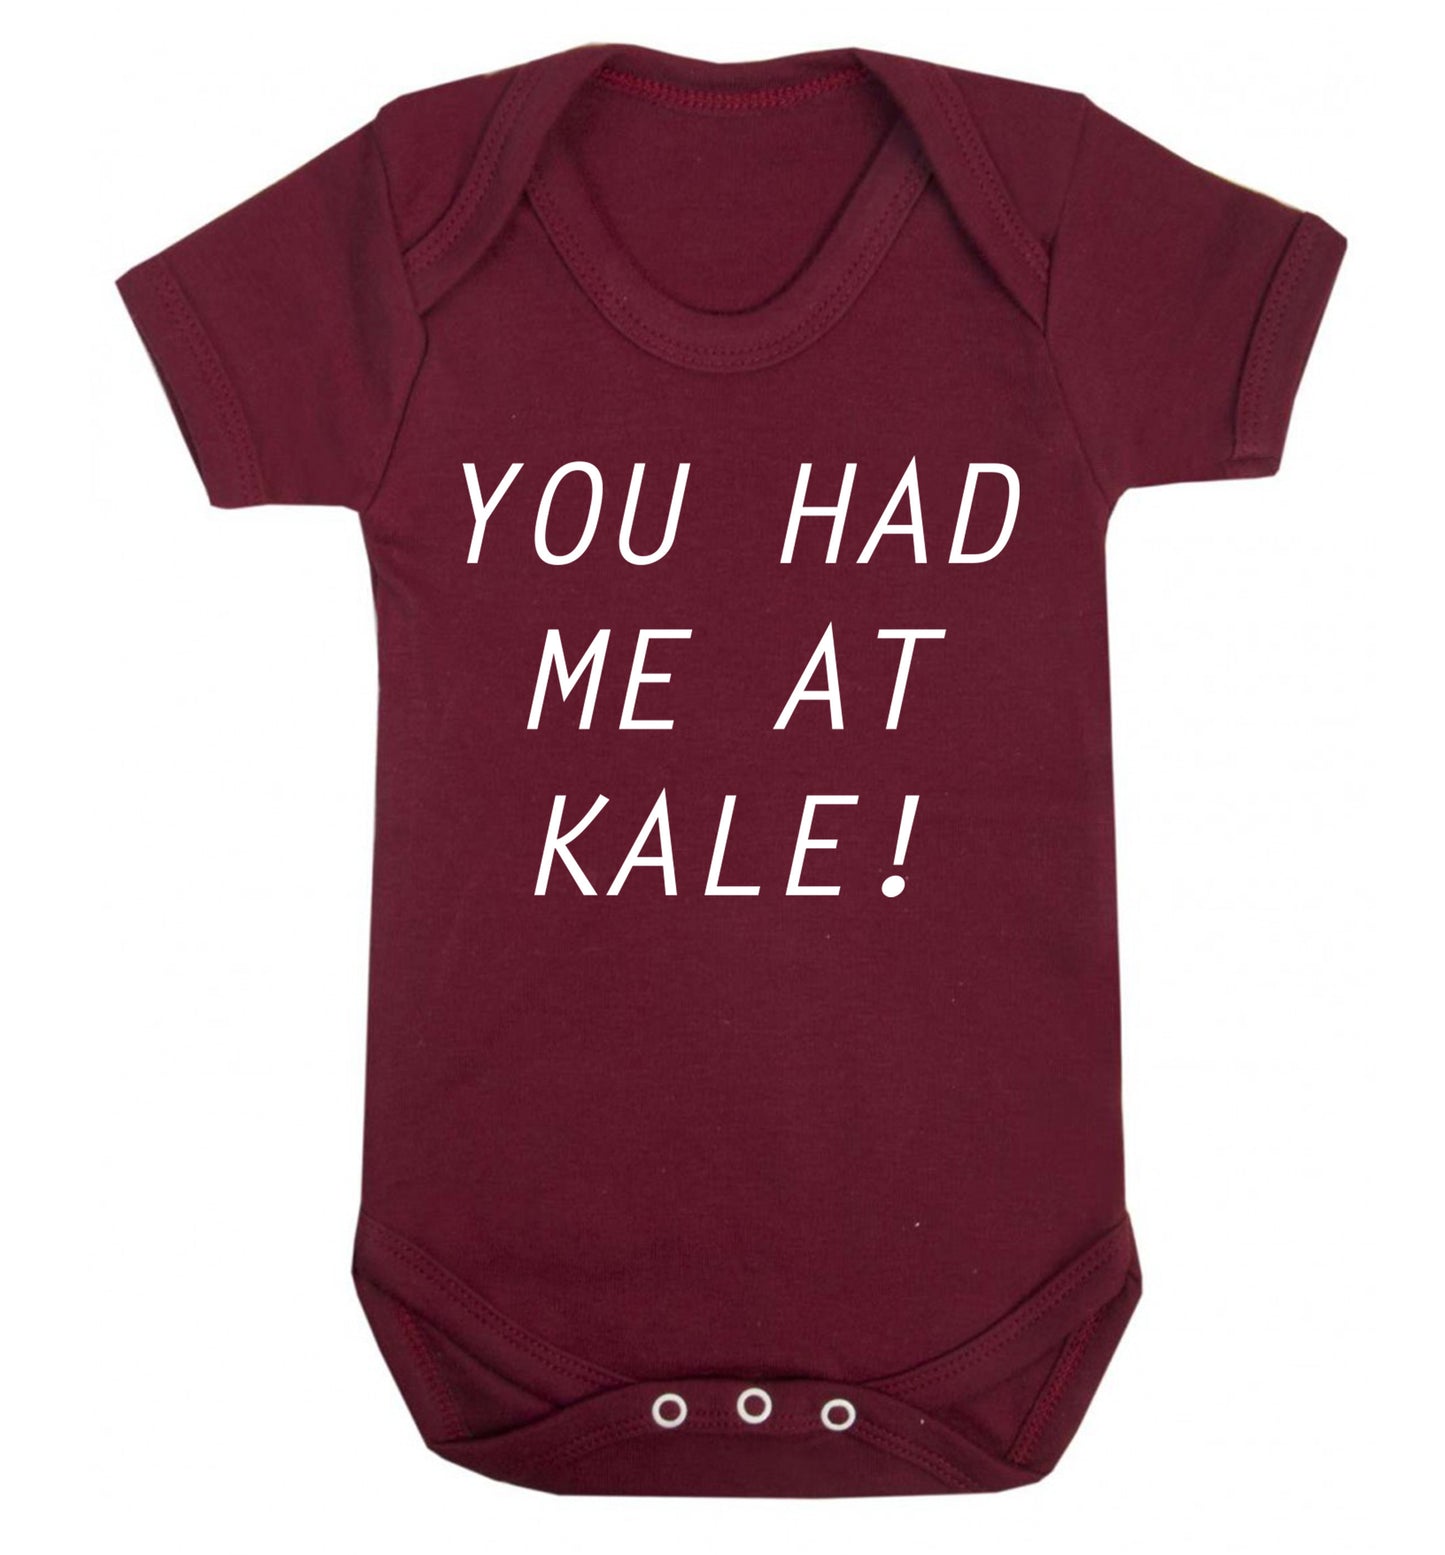 You had me at kale Baby Vest maroon 18-24 months